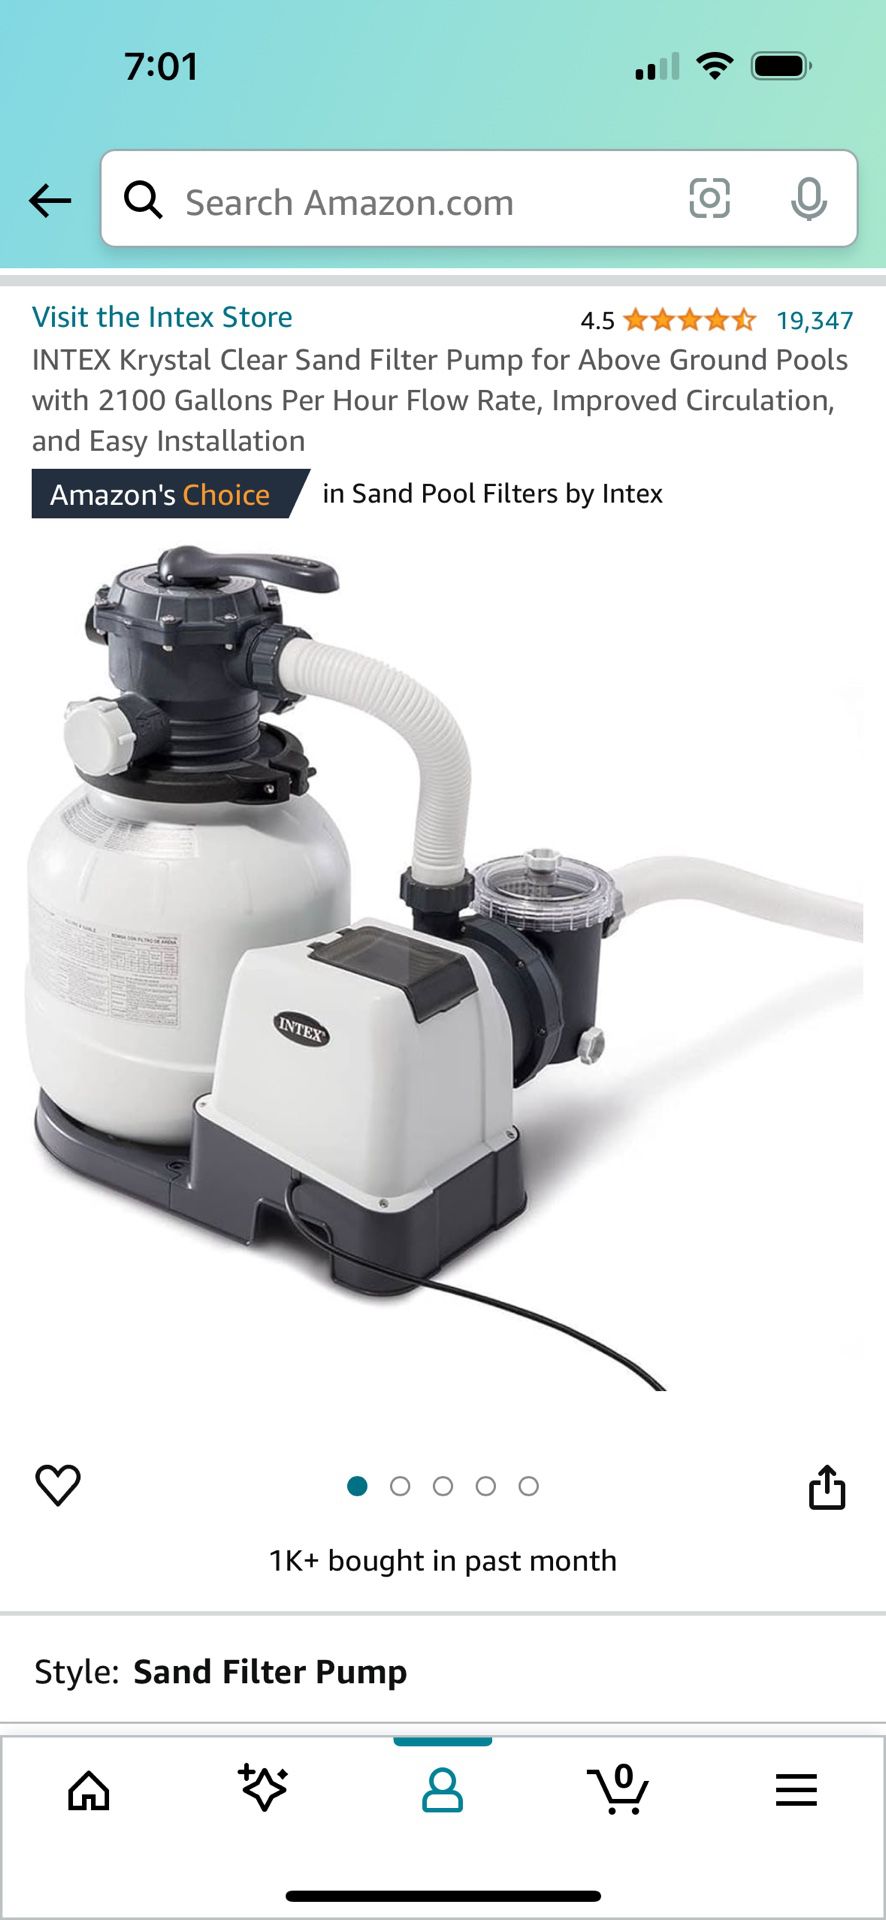 Brand New Krystal Clear Sand Filter Pump For Above Ground Pool